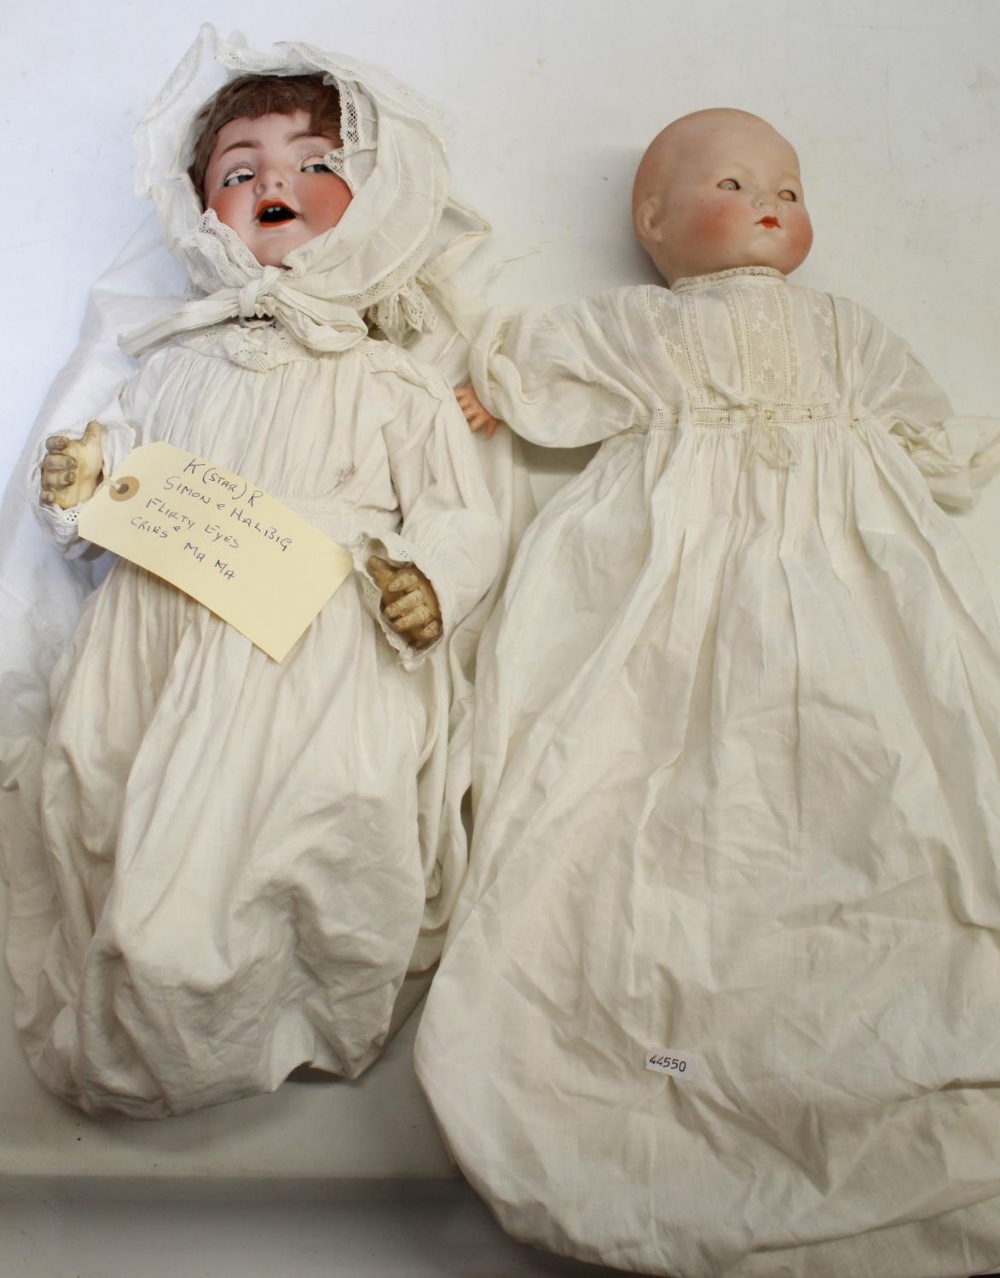 Two early 20th century bisque head baby dolls: crying doll marked Simon and Halbig 126, white gown